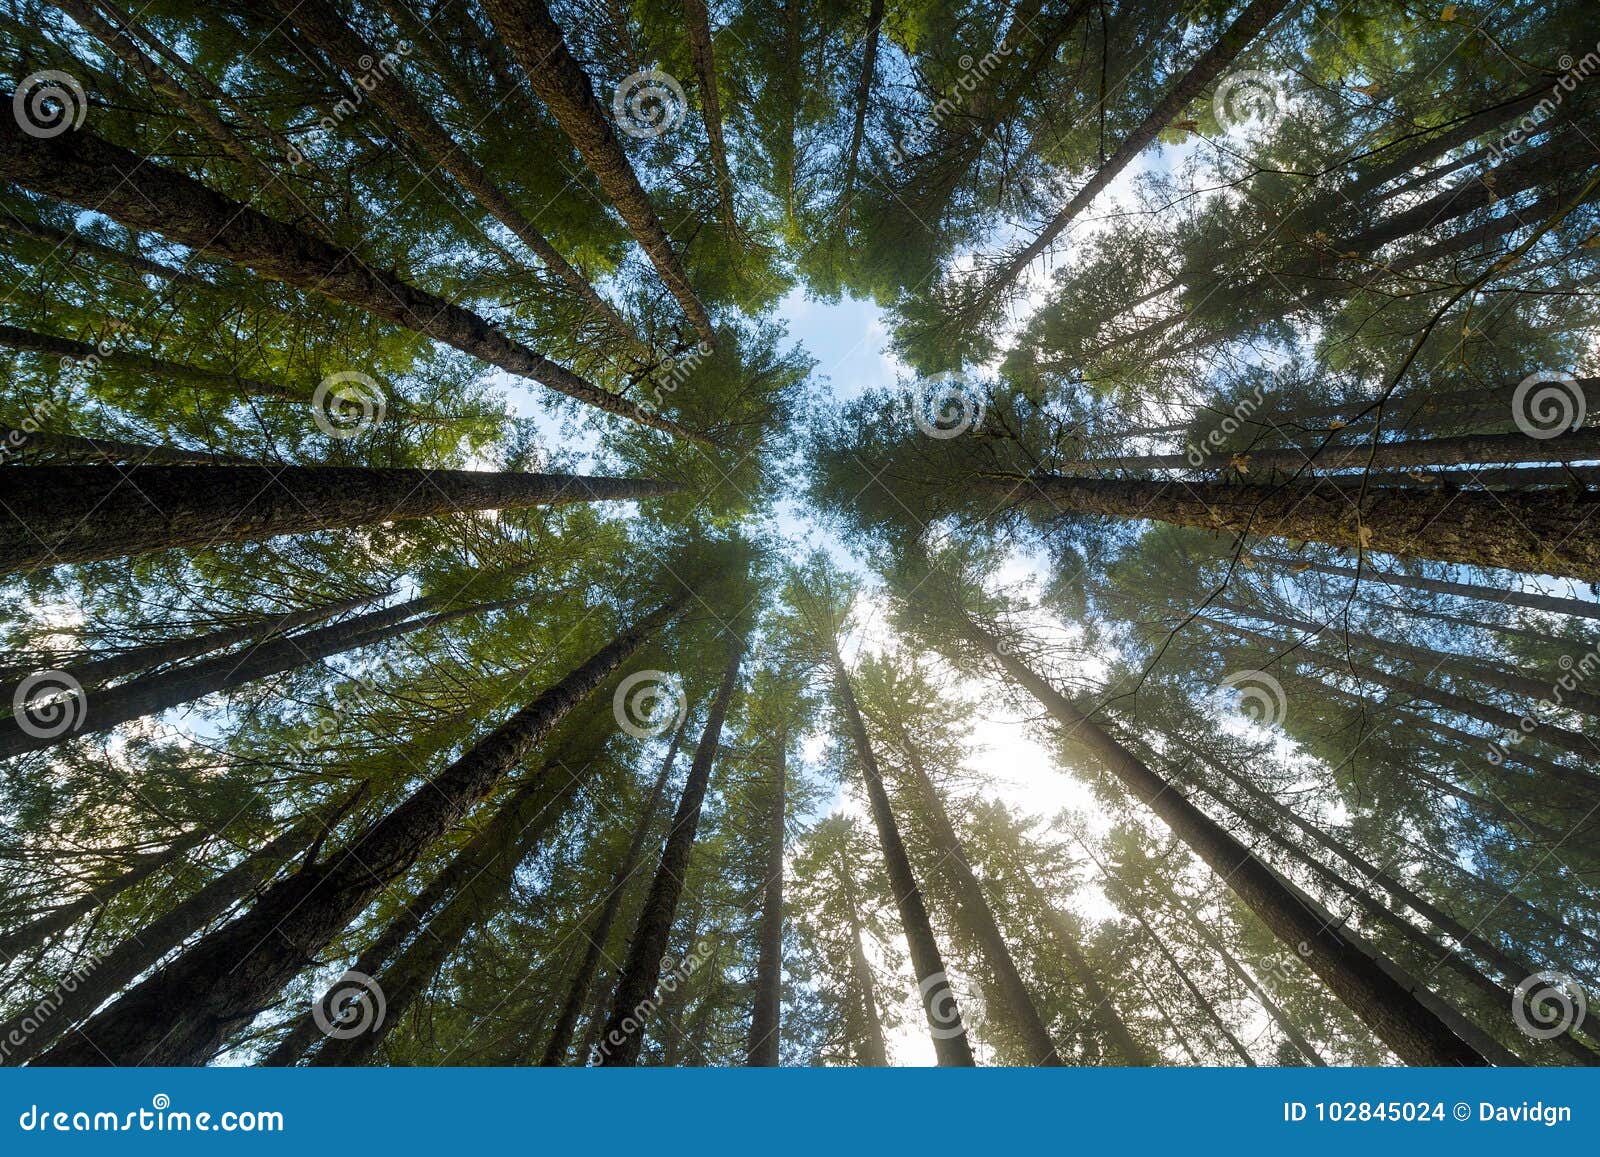 towering fir trees in oregon forest state park